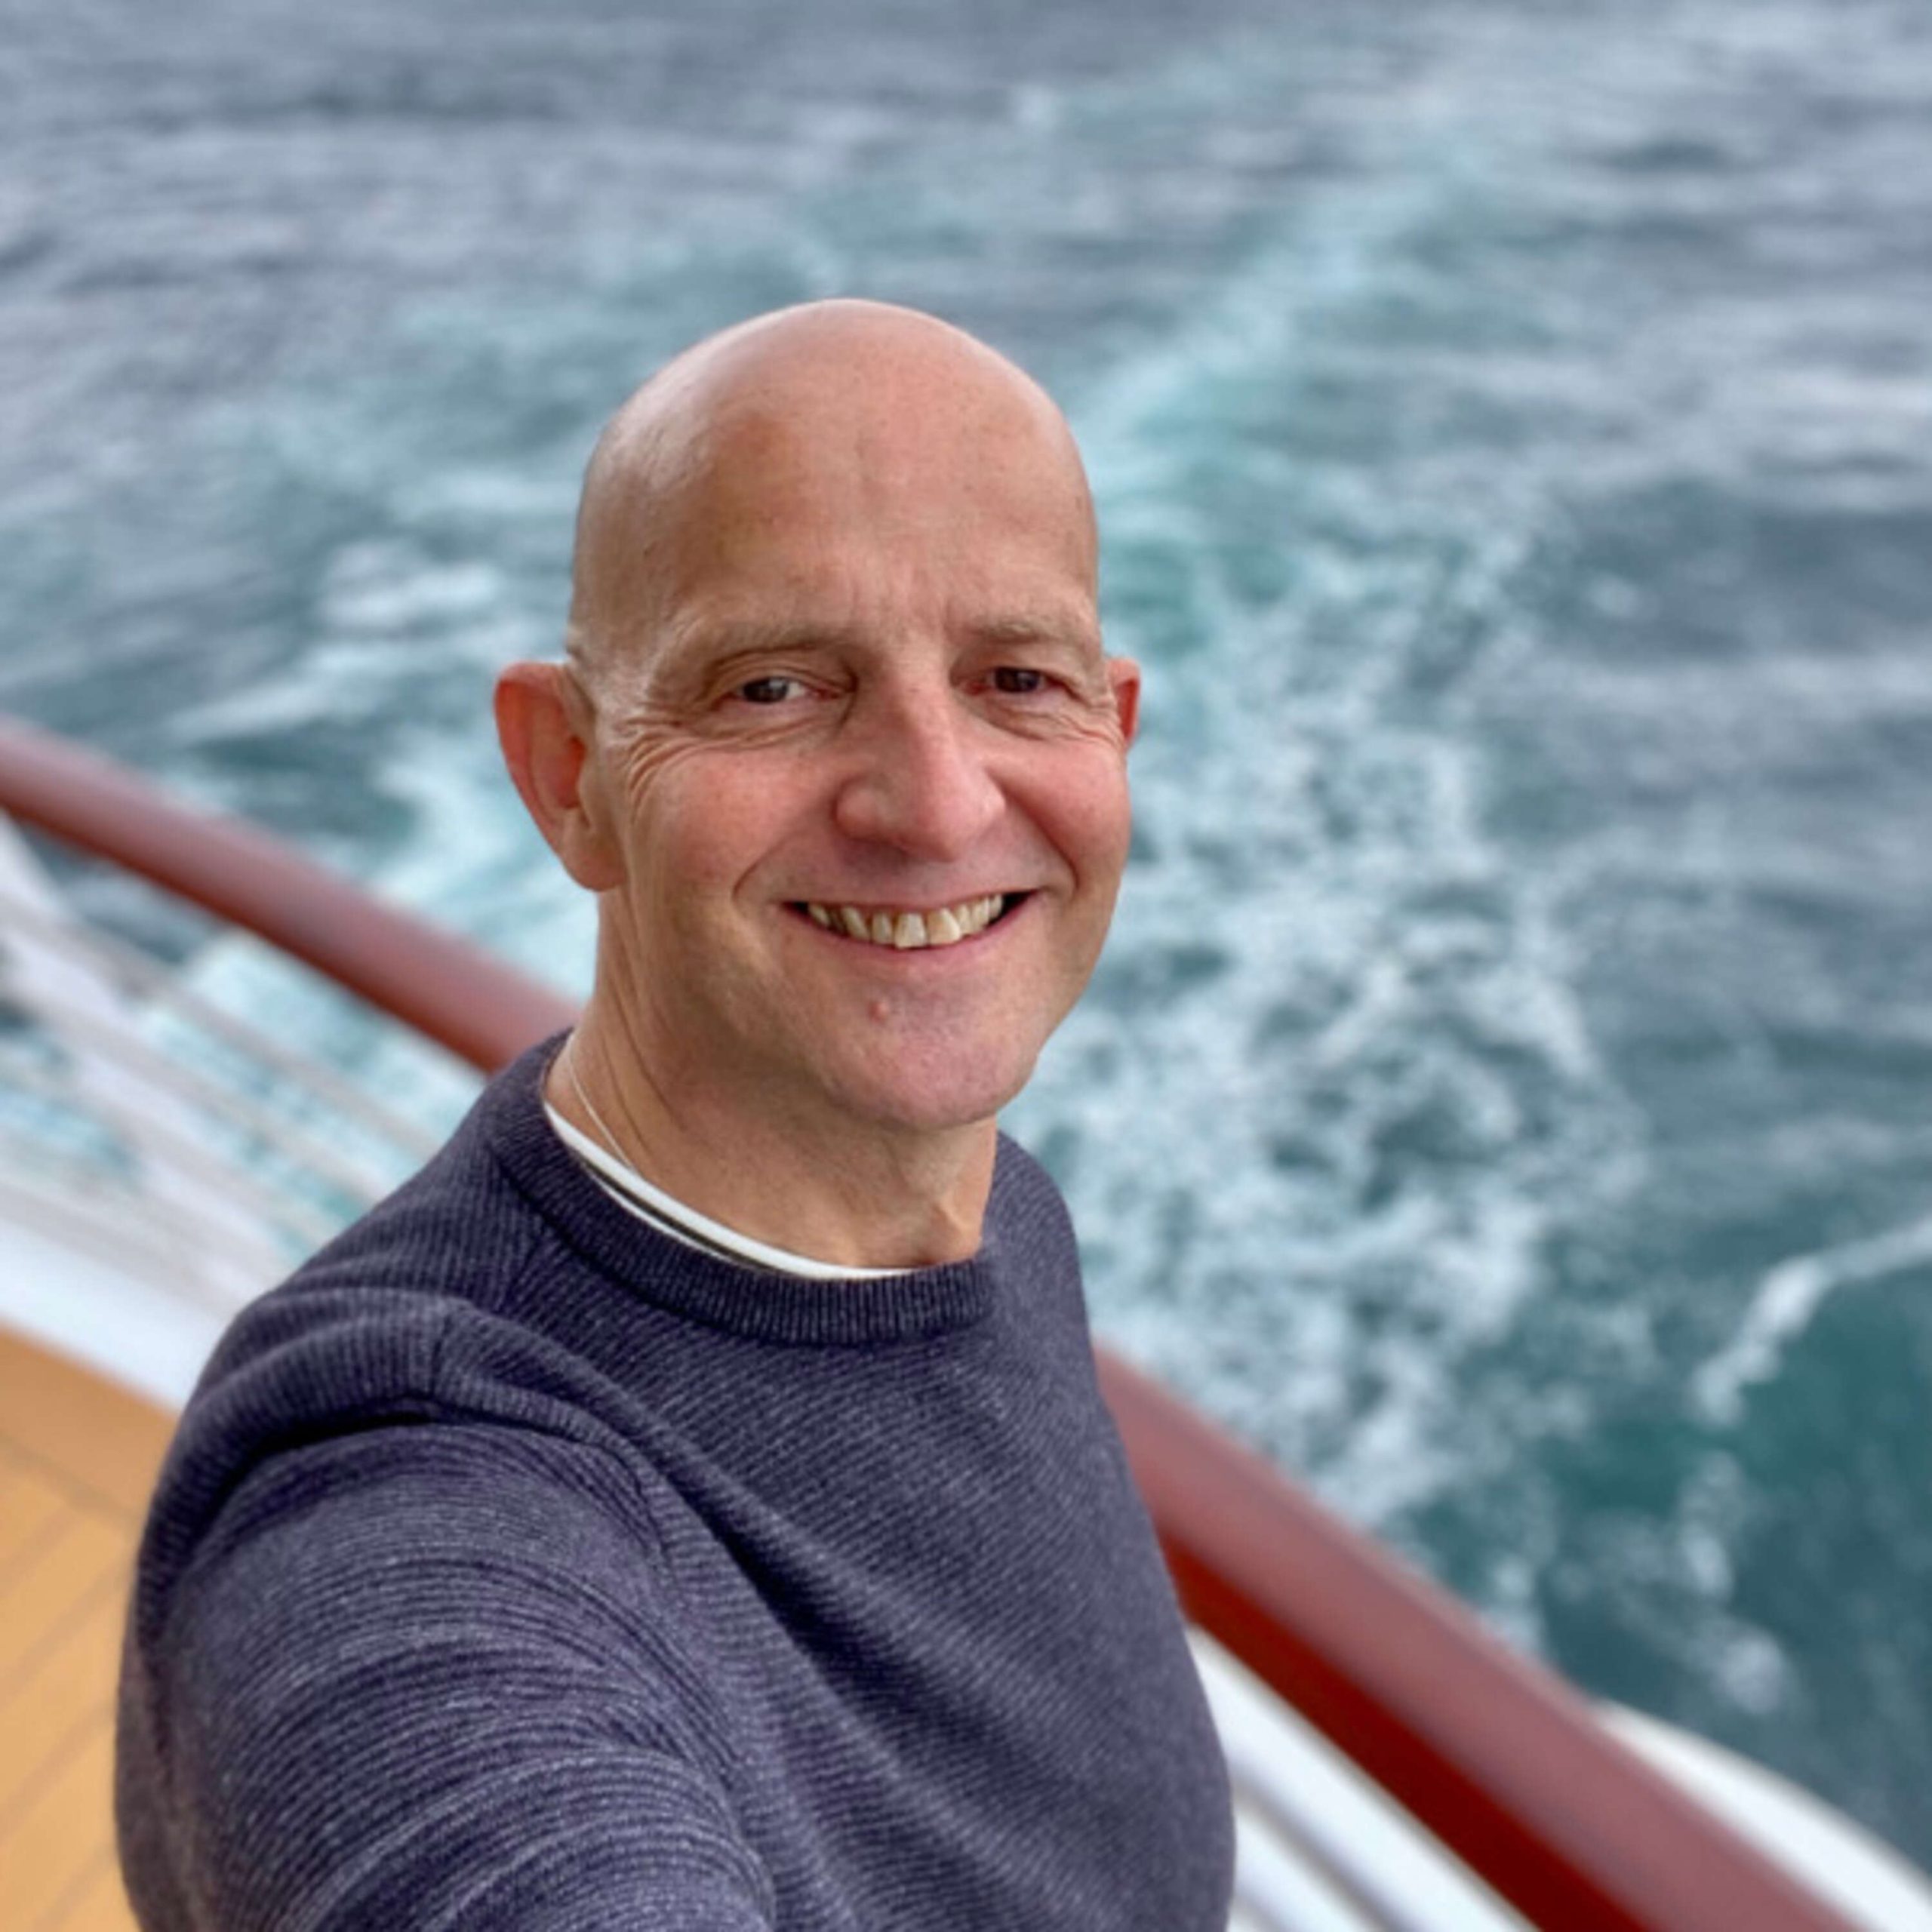 A bald man taking a selfie on the deck of a cruise ship.